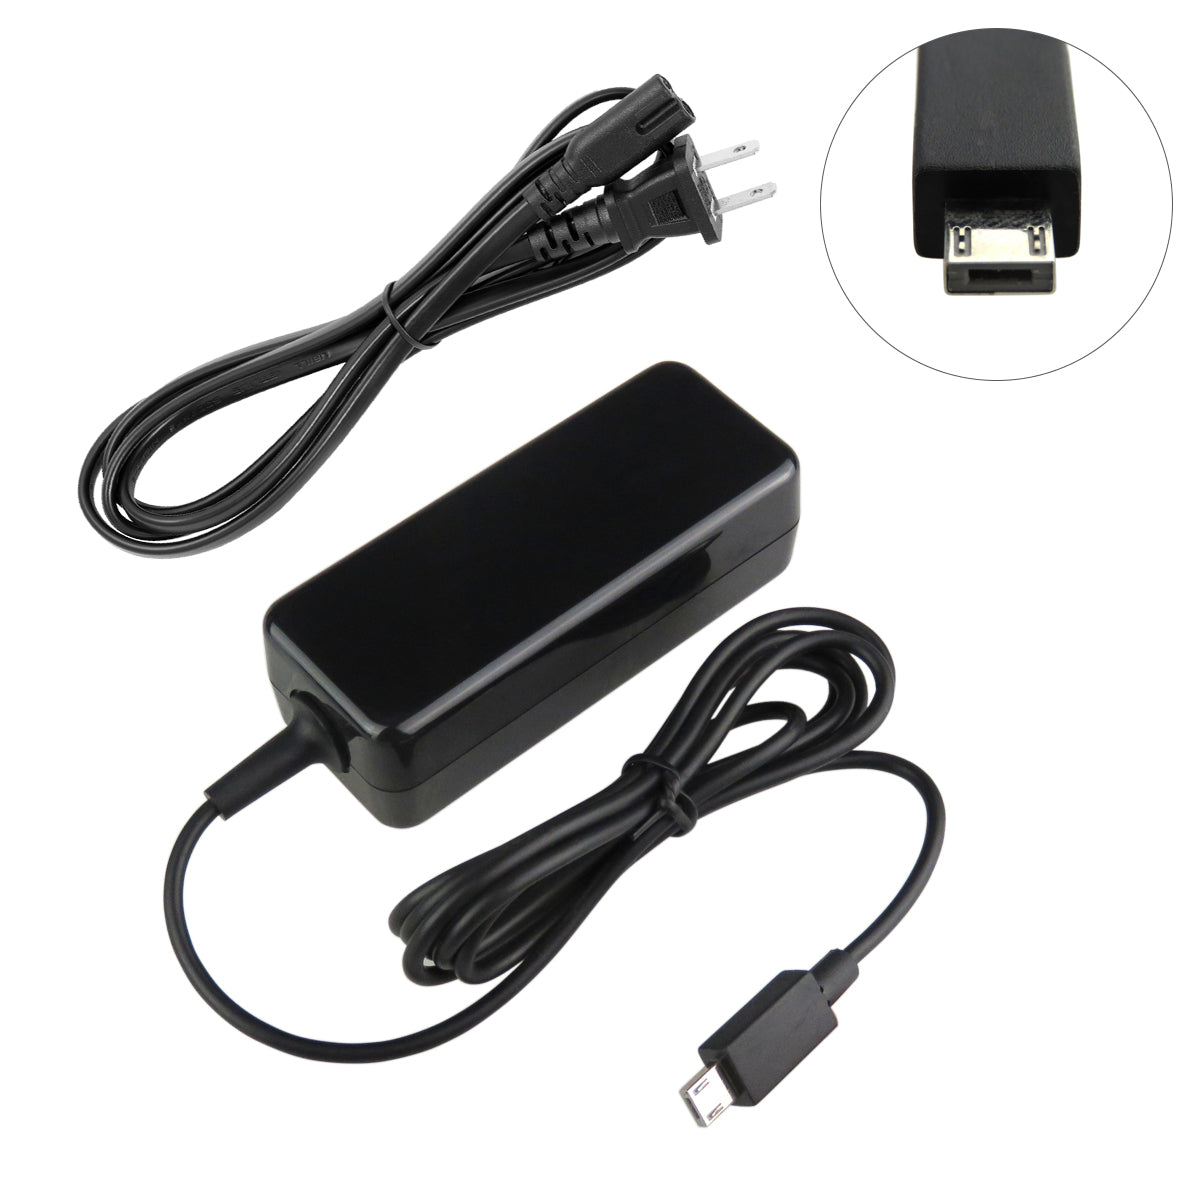 Charger for ASUS Transformer TP200SA-DH04T Laptop.